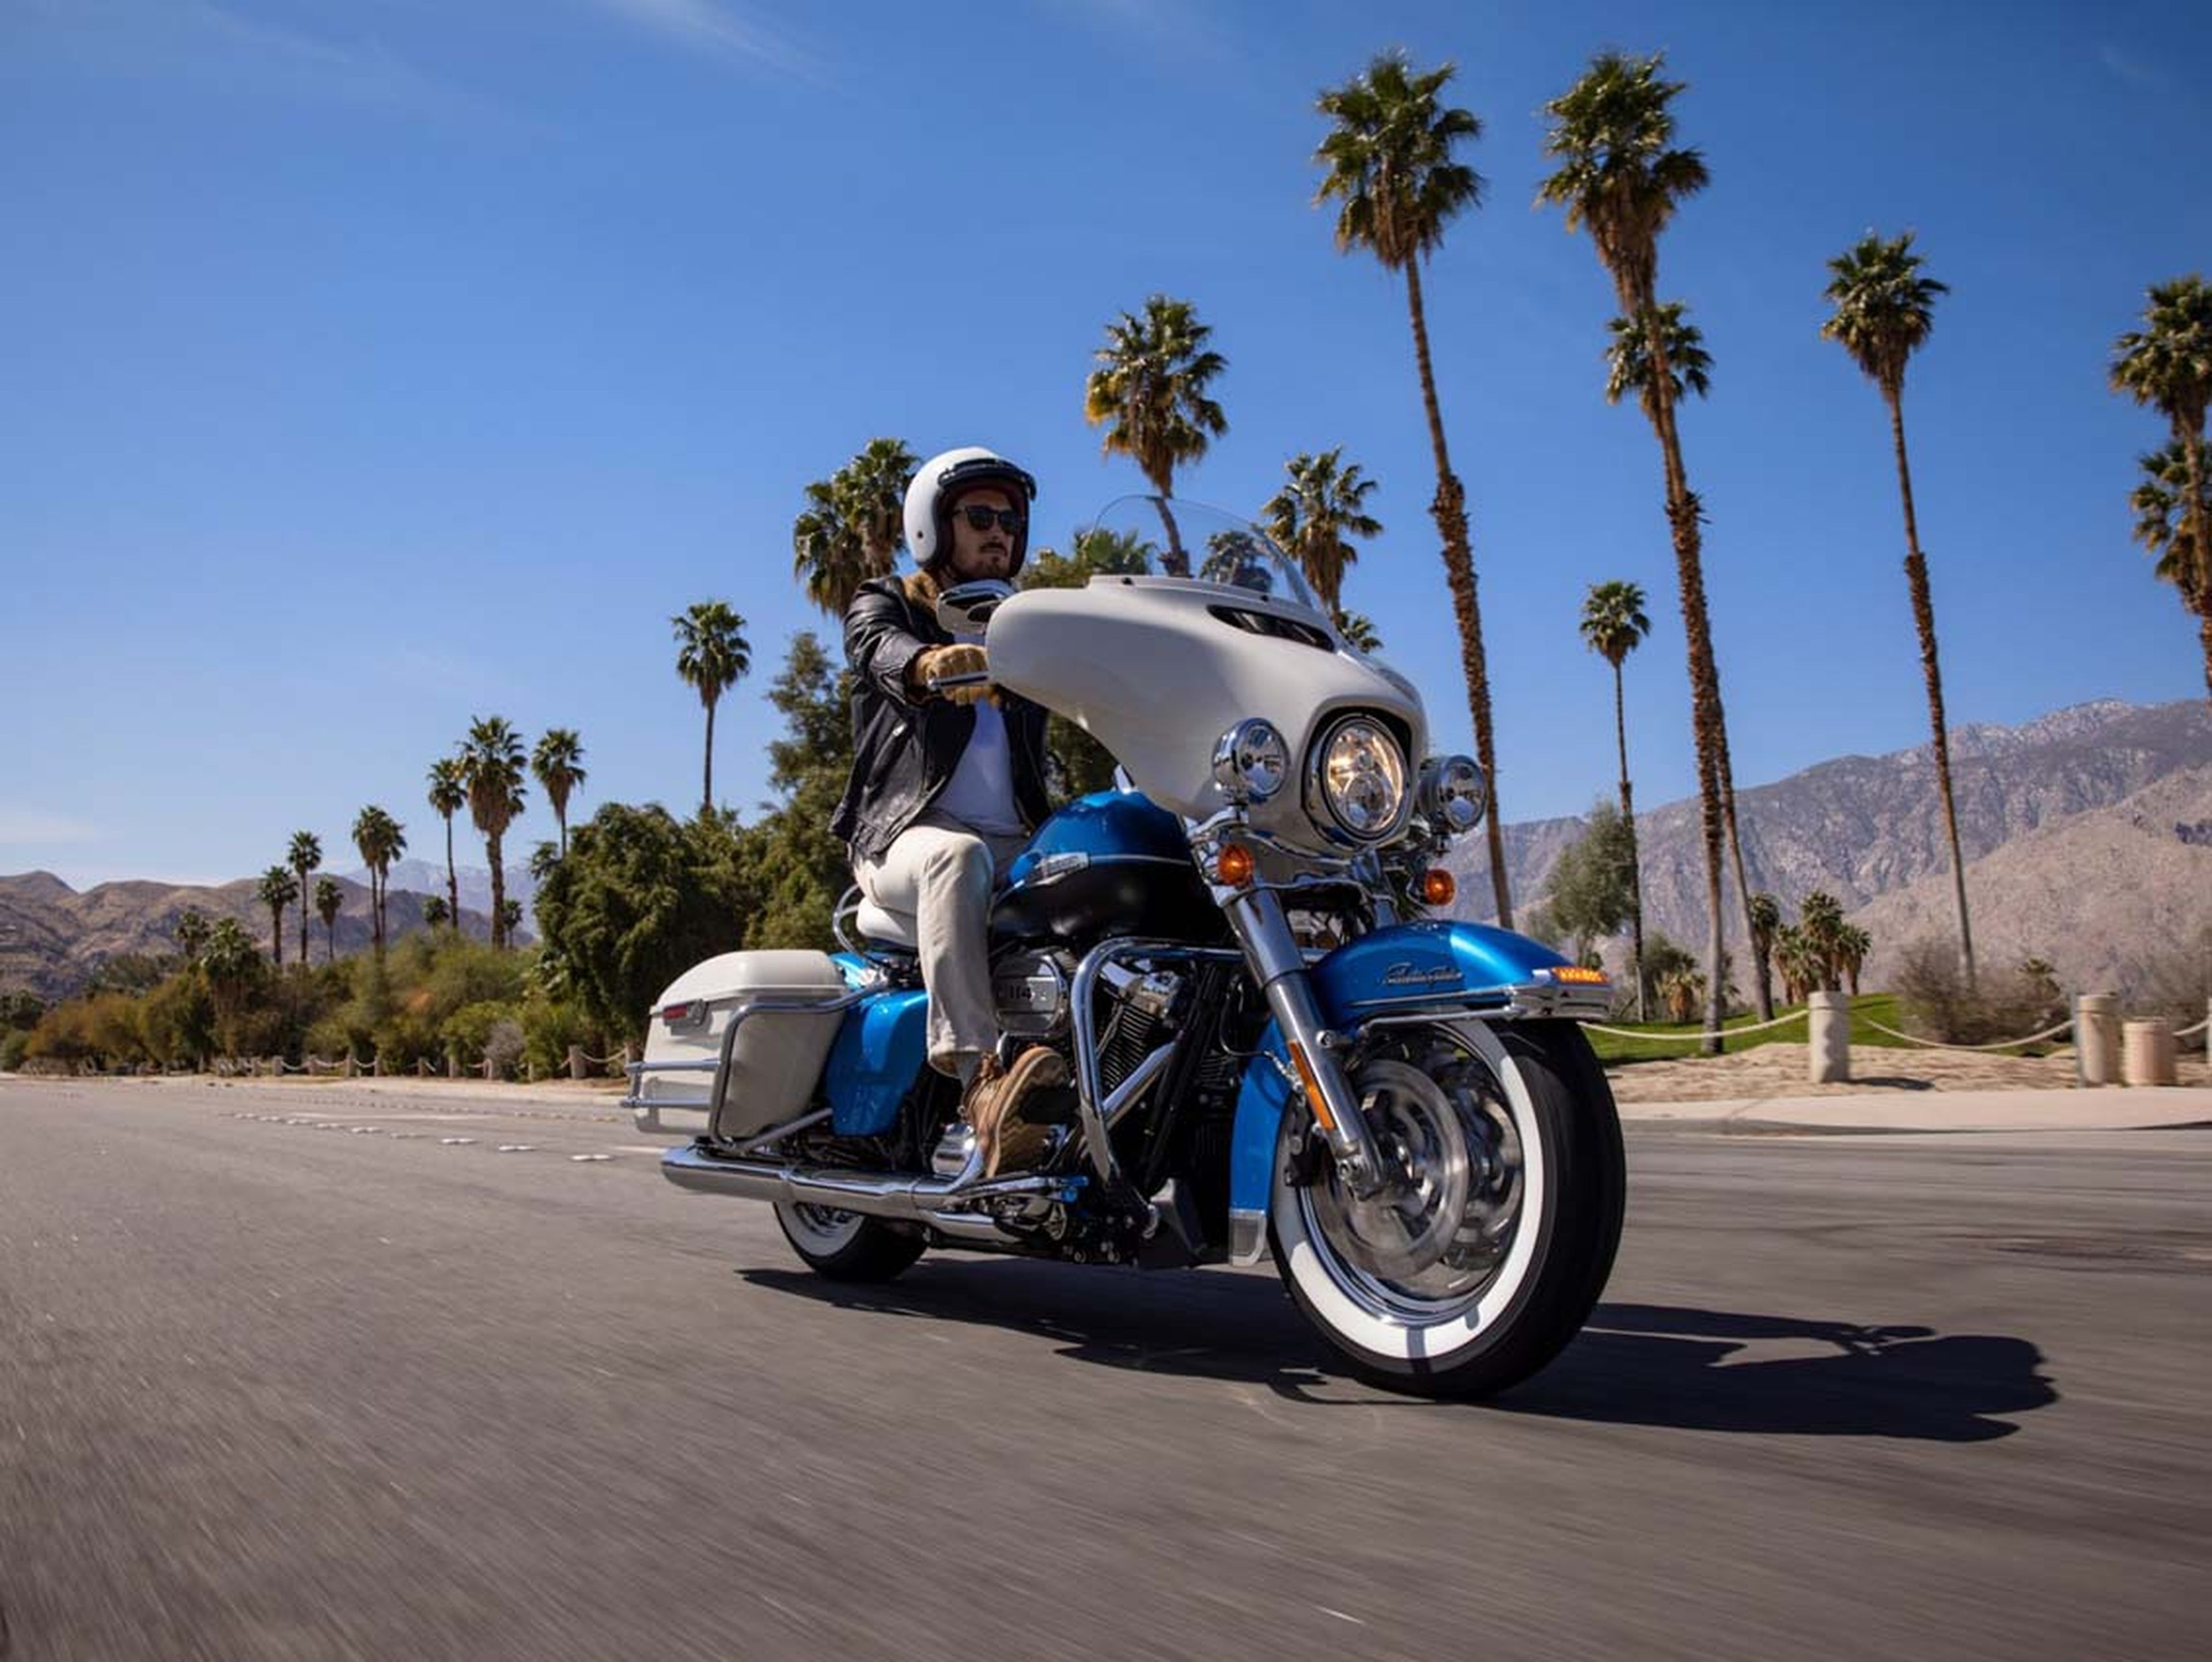 Harley Davidson Icons Collection: Harley Electra Glide Revival